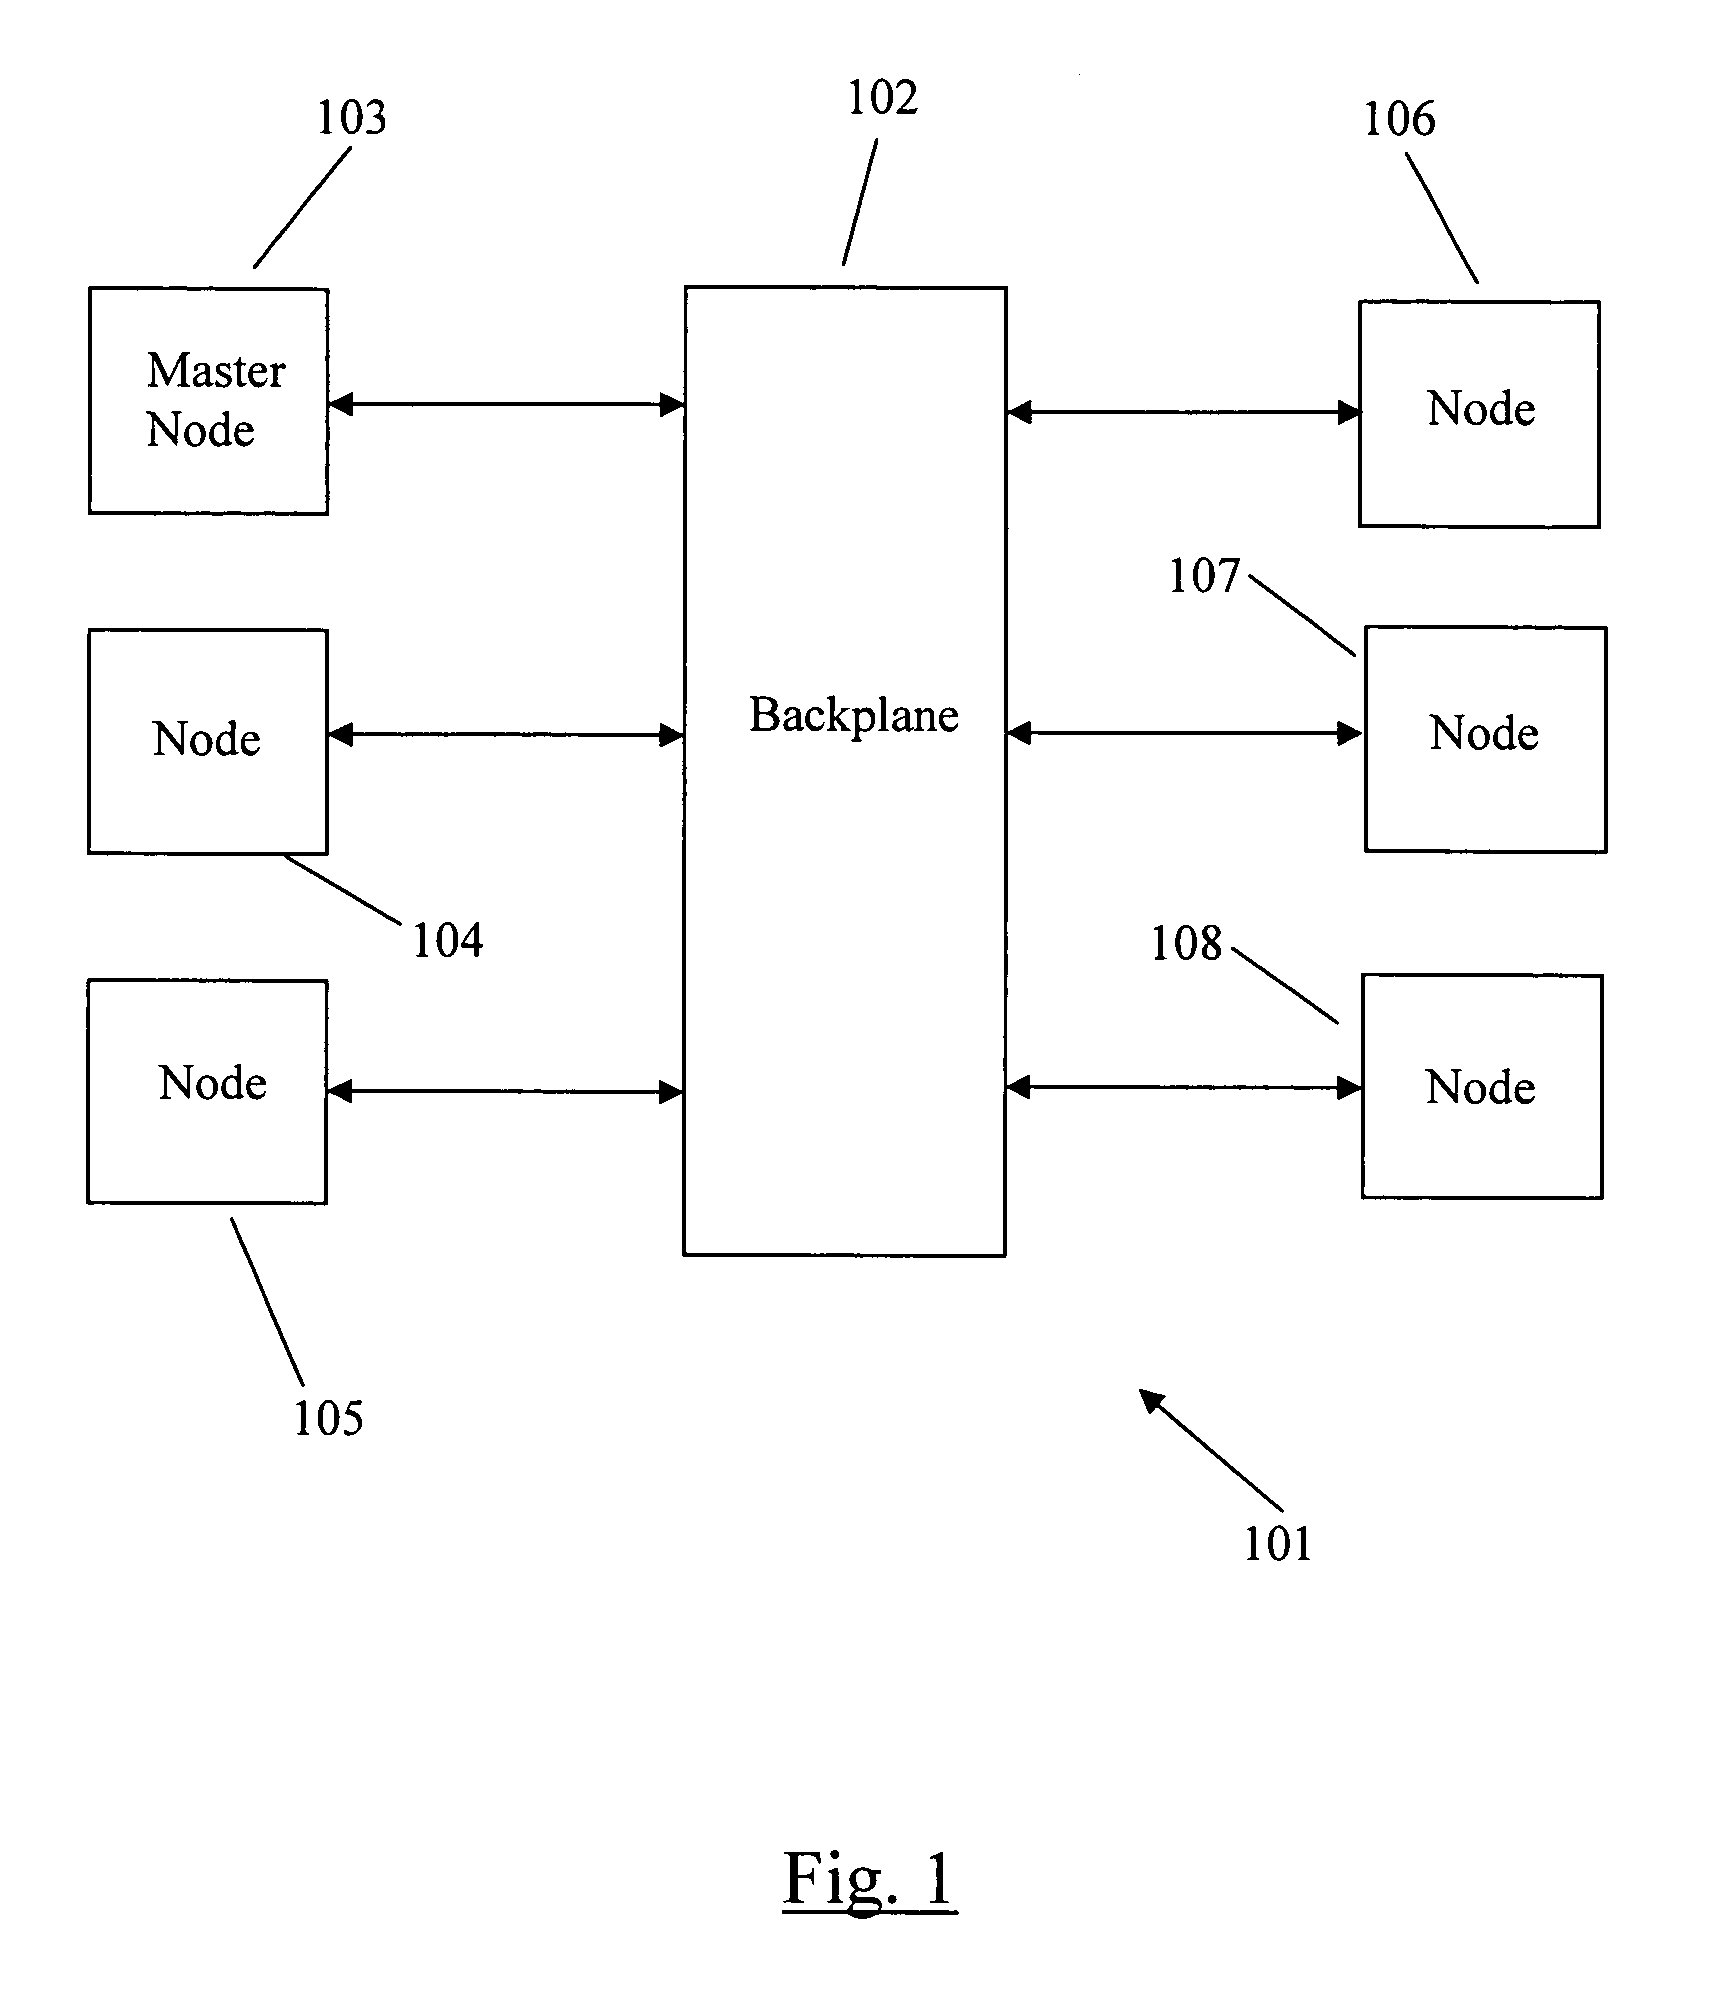 Dynamic installation and activation of software packages in a distributed networking device